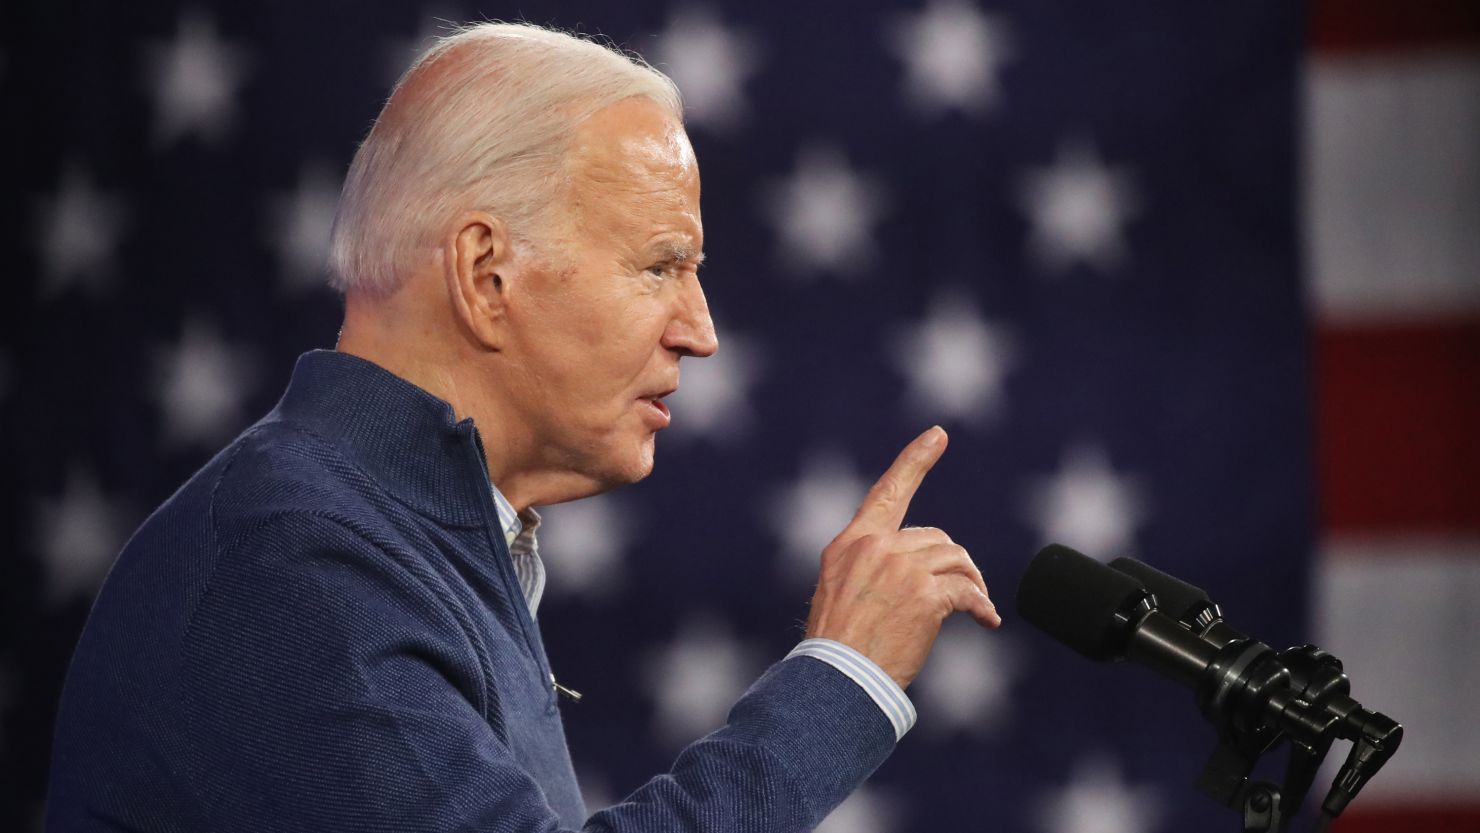 President Joe Biden speaks during a campaign event on March 8, 2024, in Wallingford, Pennsylvania.